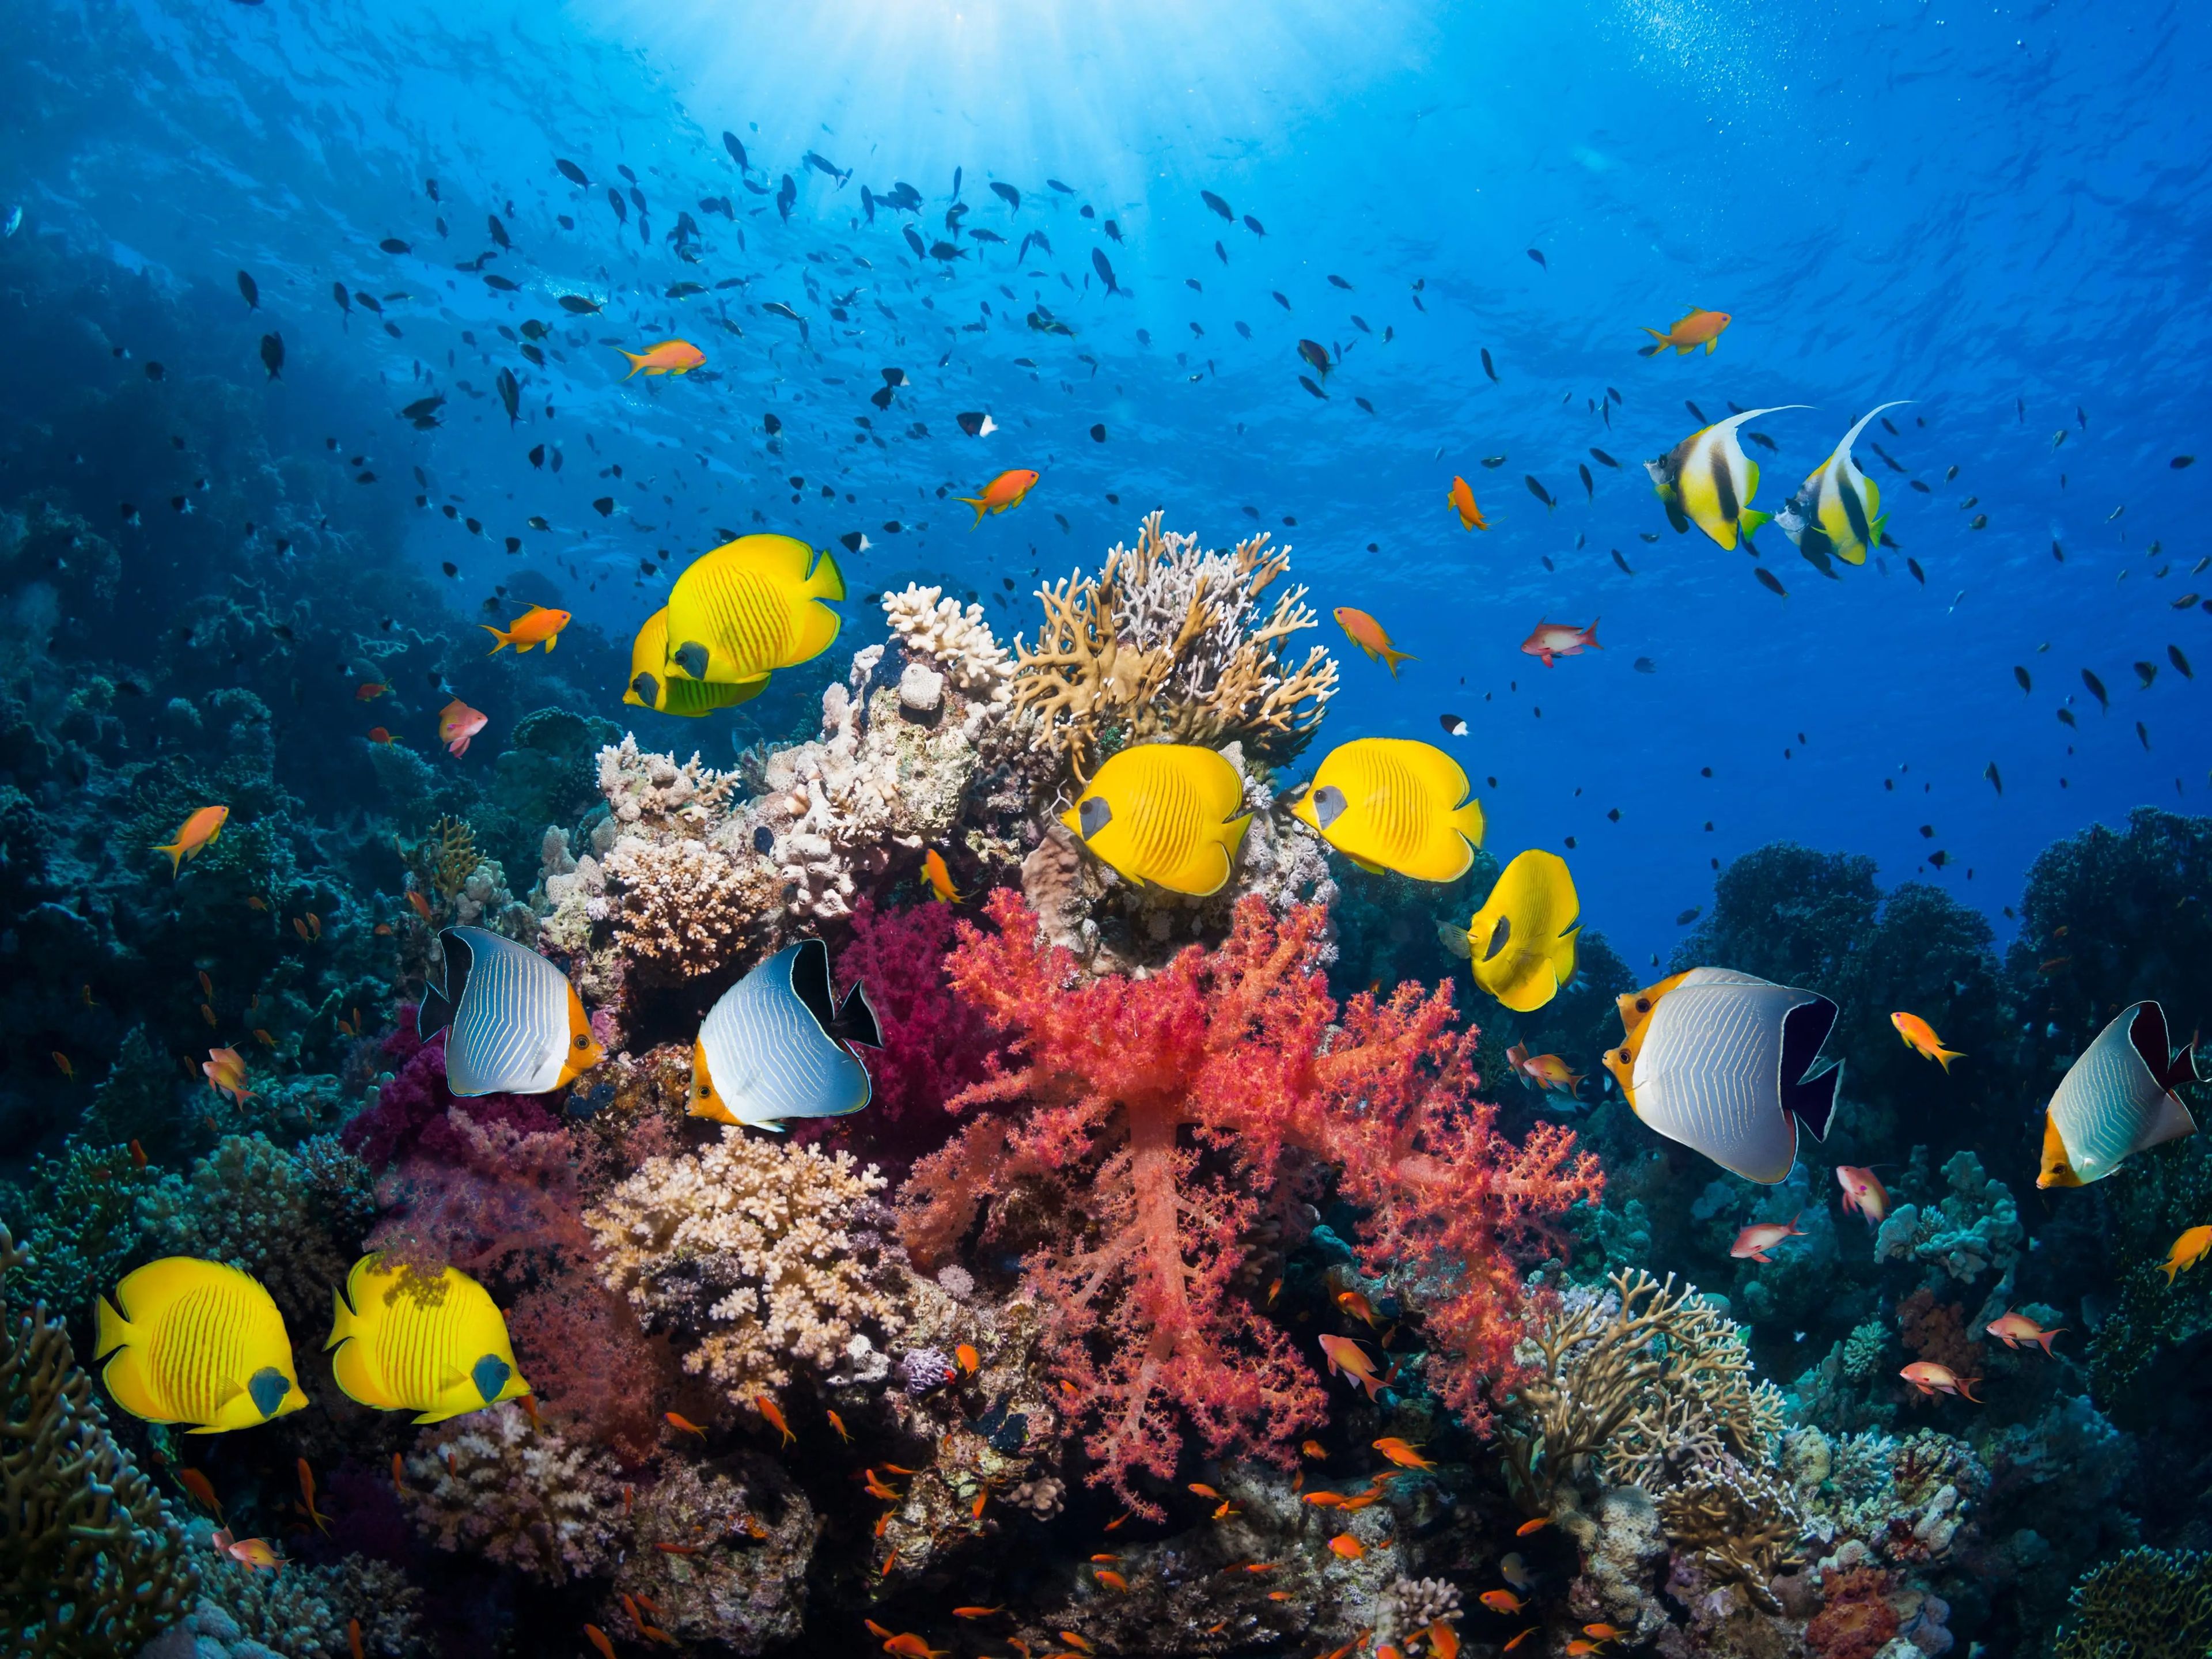 Coral reef scenery with variety of fish.